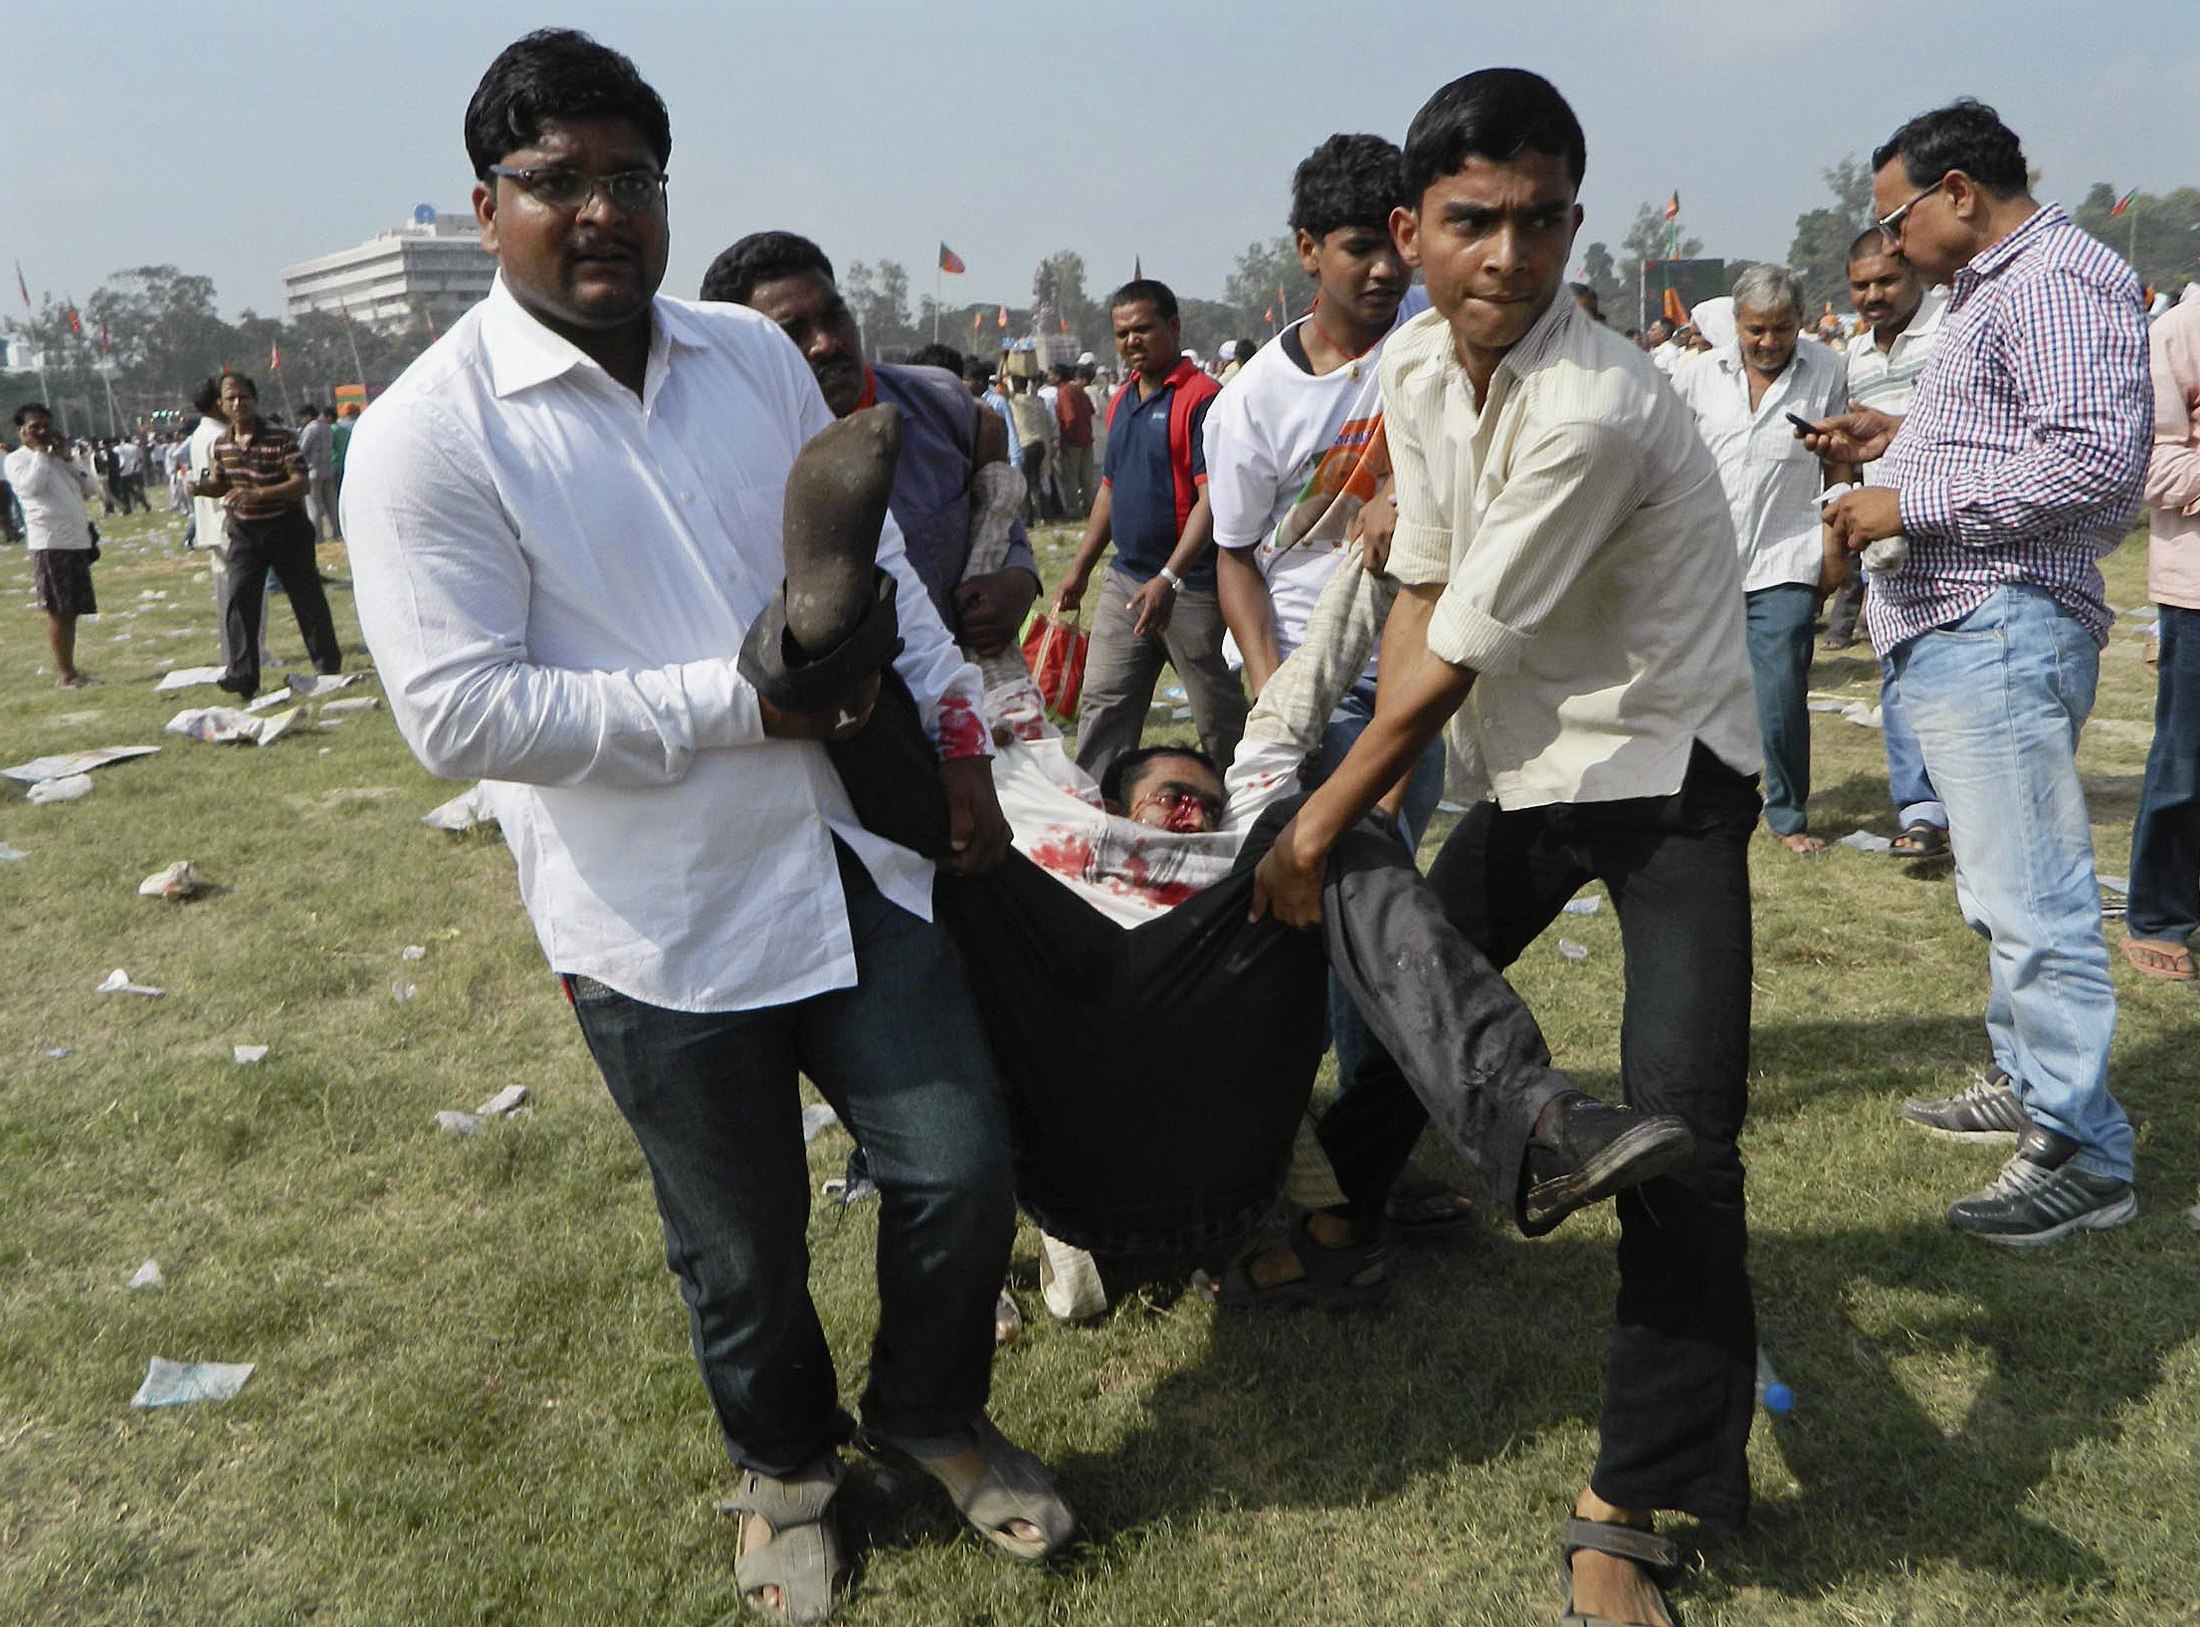 People carry an injured man after a bomb blast in Patna. Photo: reuters